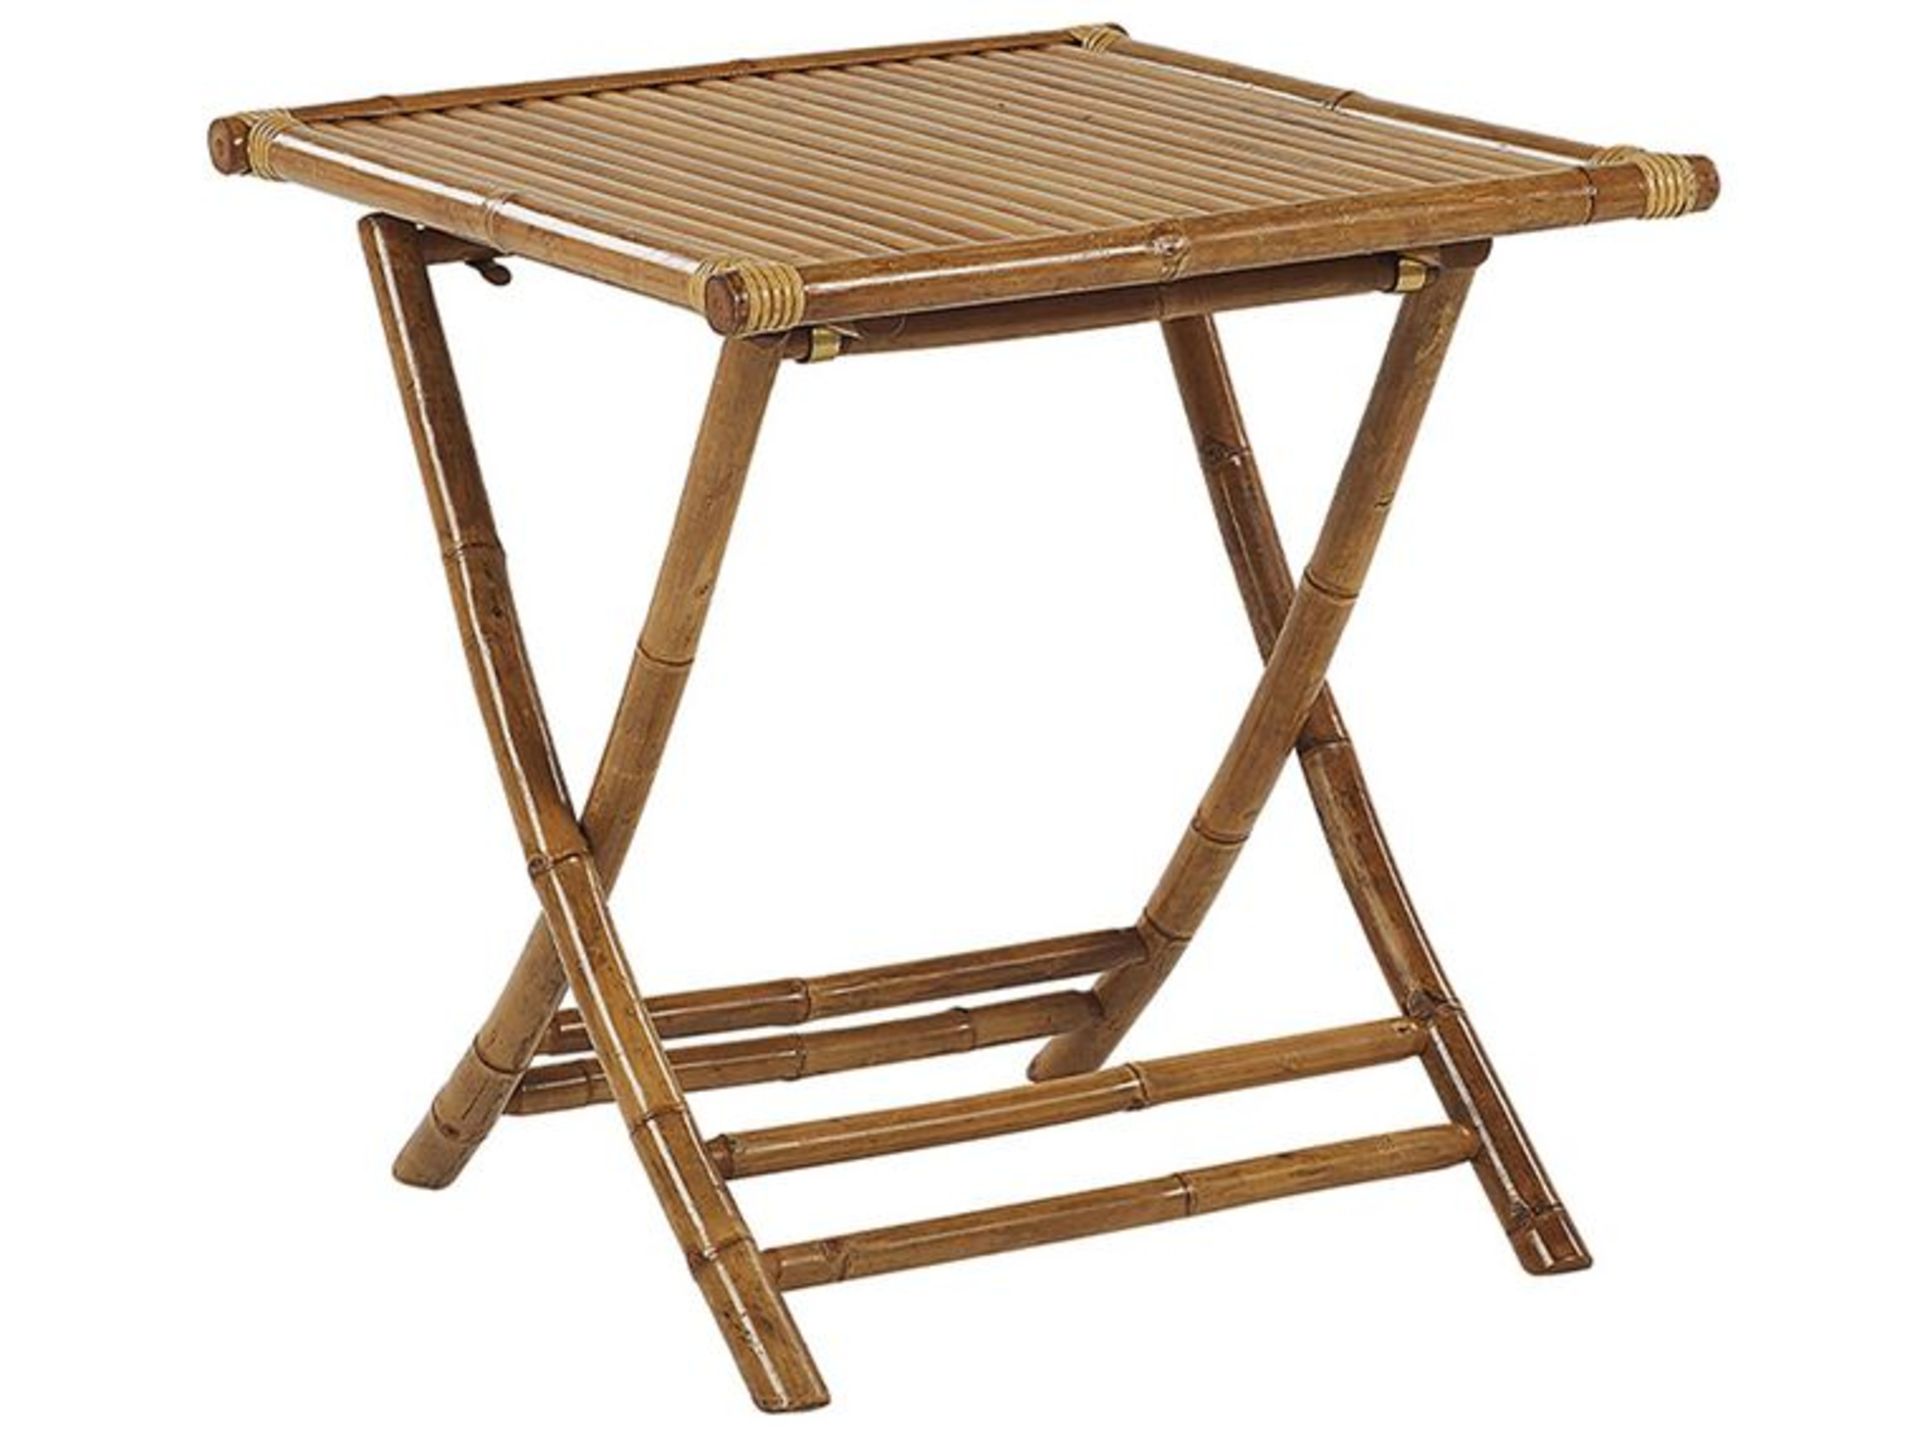 Molise Bamboo Bistro Table 70 x 70 cm Light Wood.- SR6U. RRP £129.99. This wooden coffee table